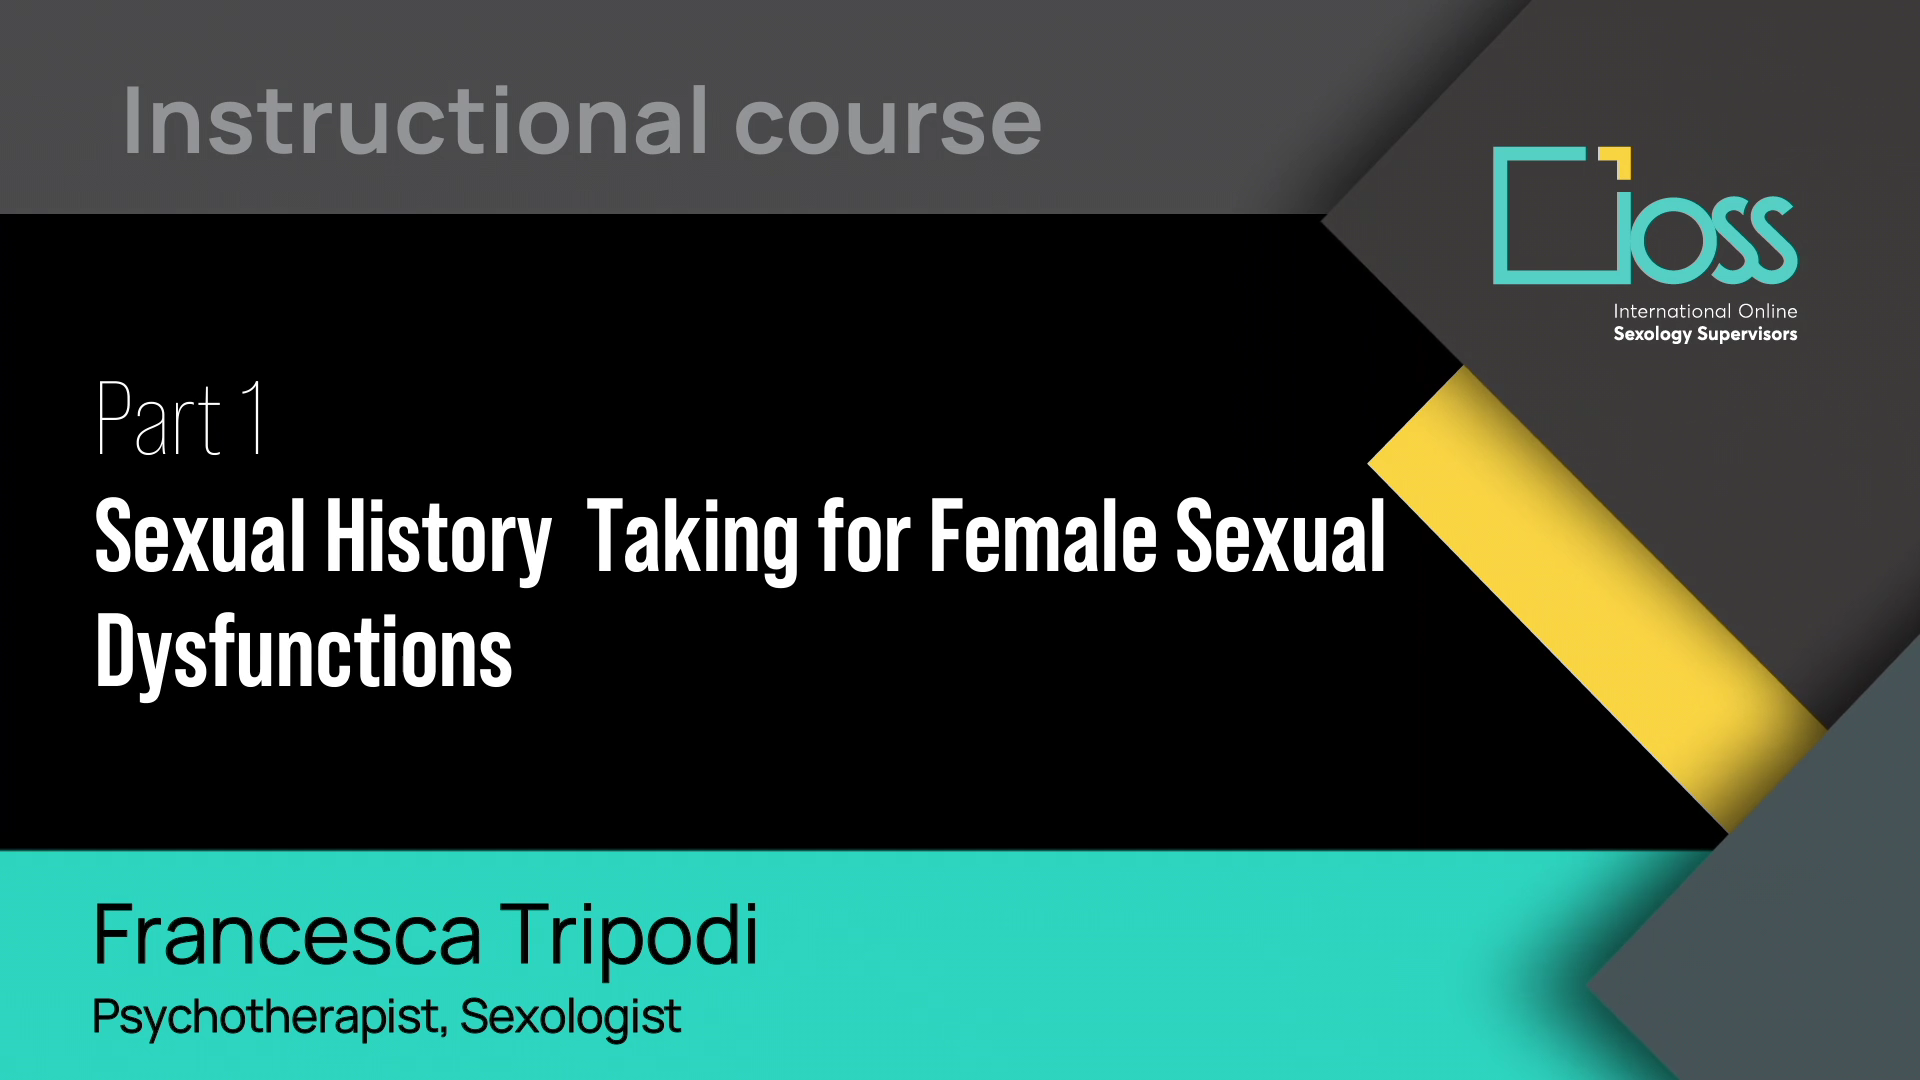 Part 1 Sexual History Taking for Female Sexual Dysfunctions (Part 1 & 2)